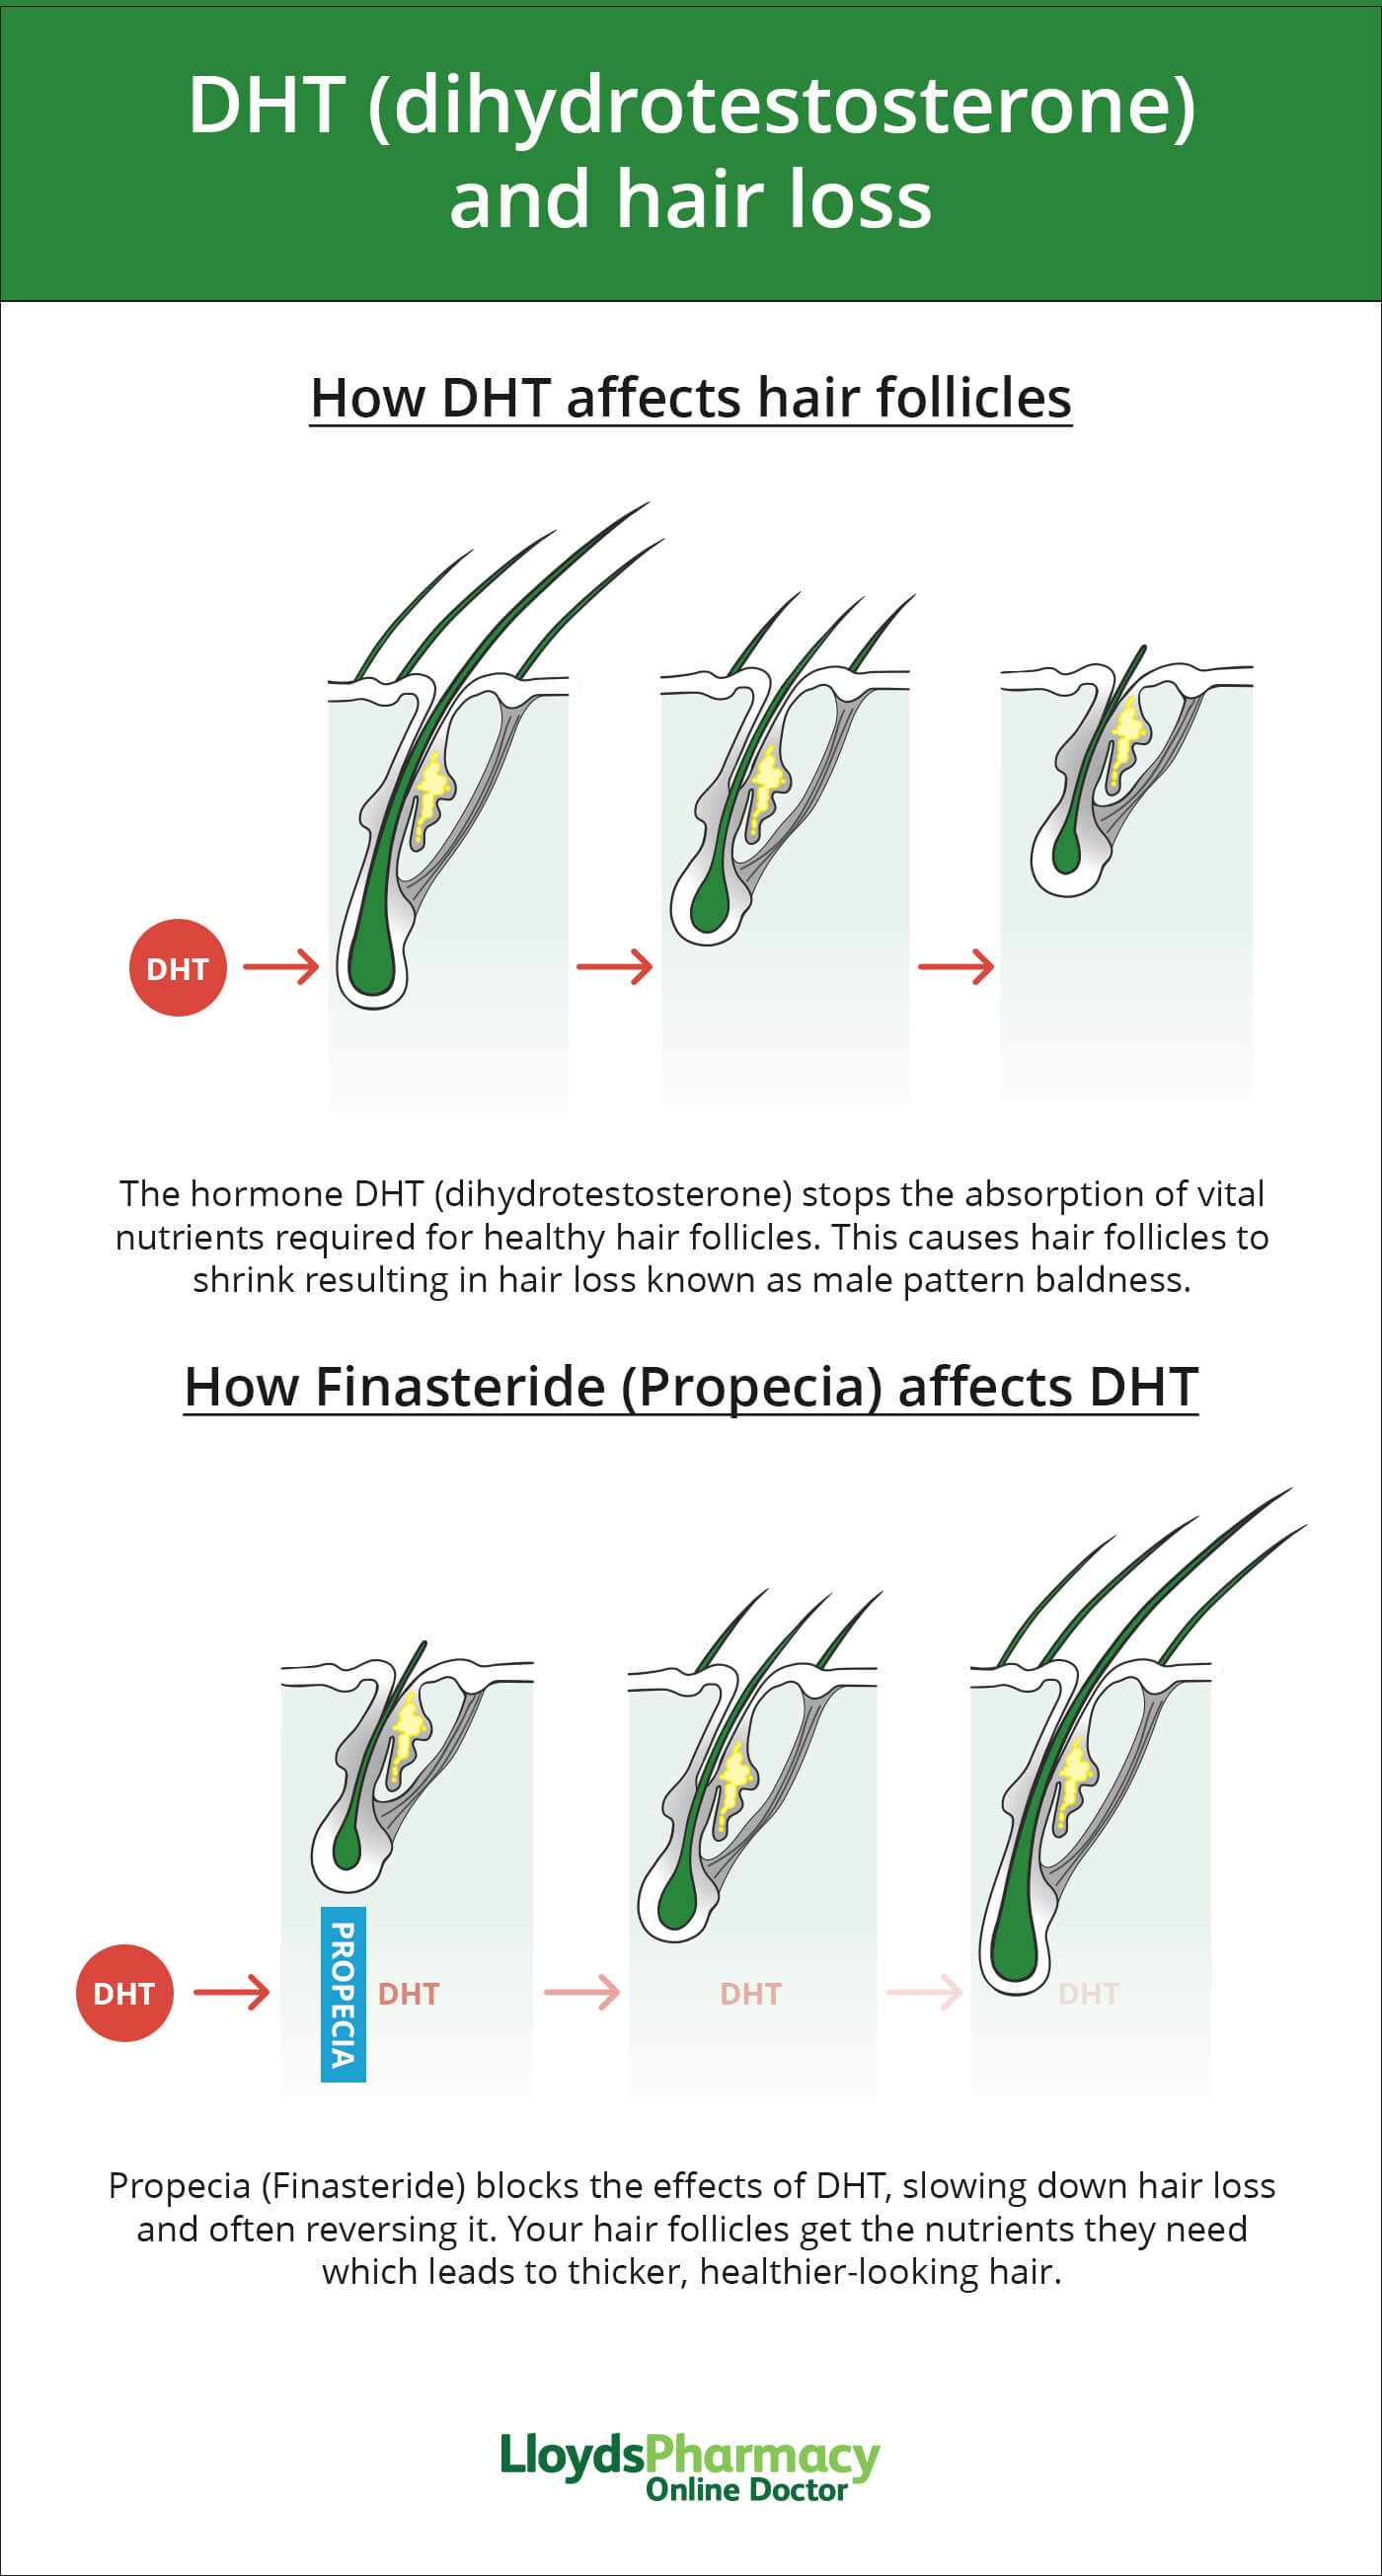 DHT and hair loss - Does propecia work